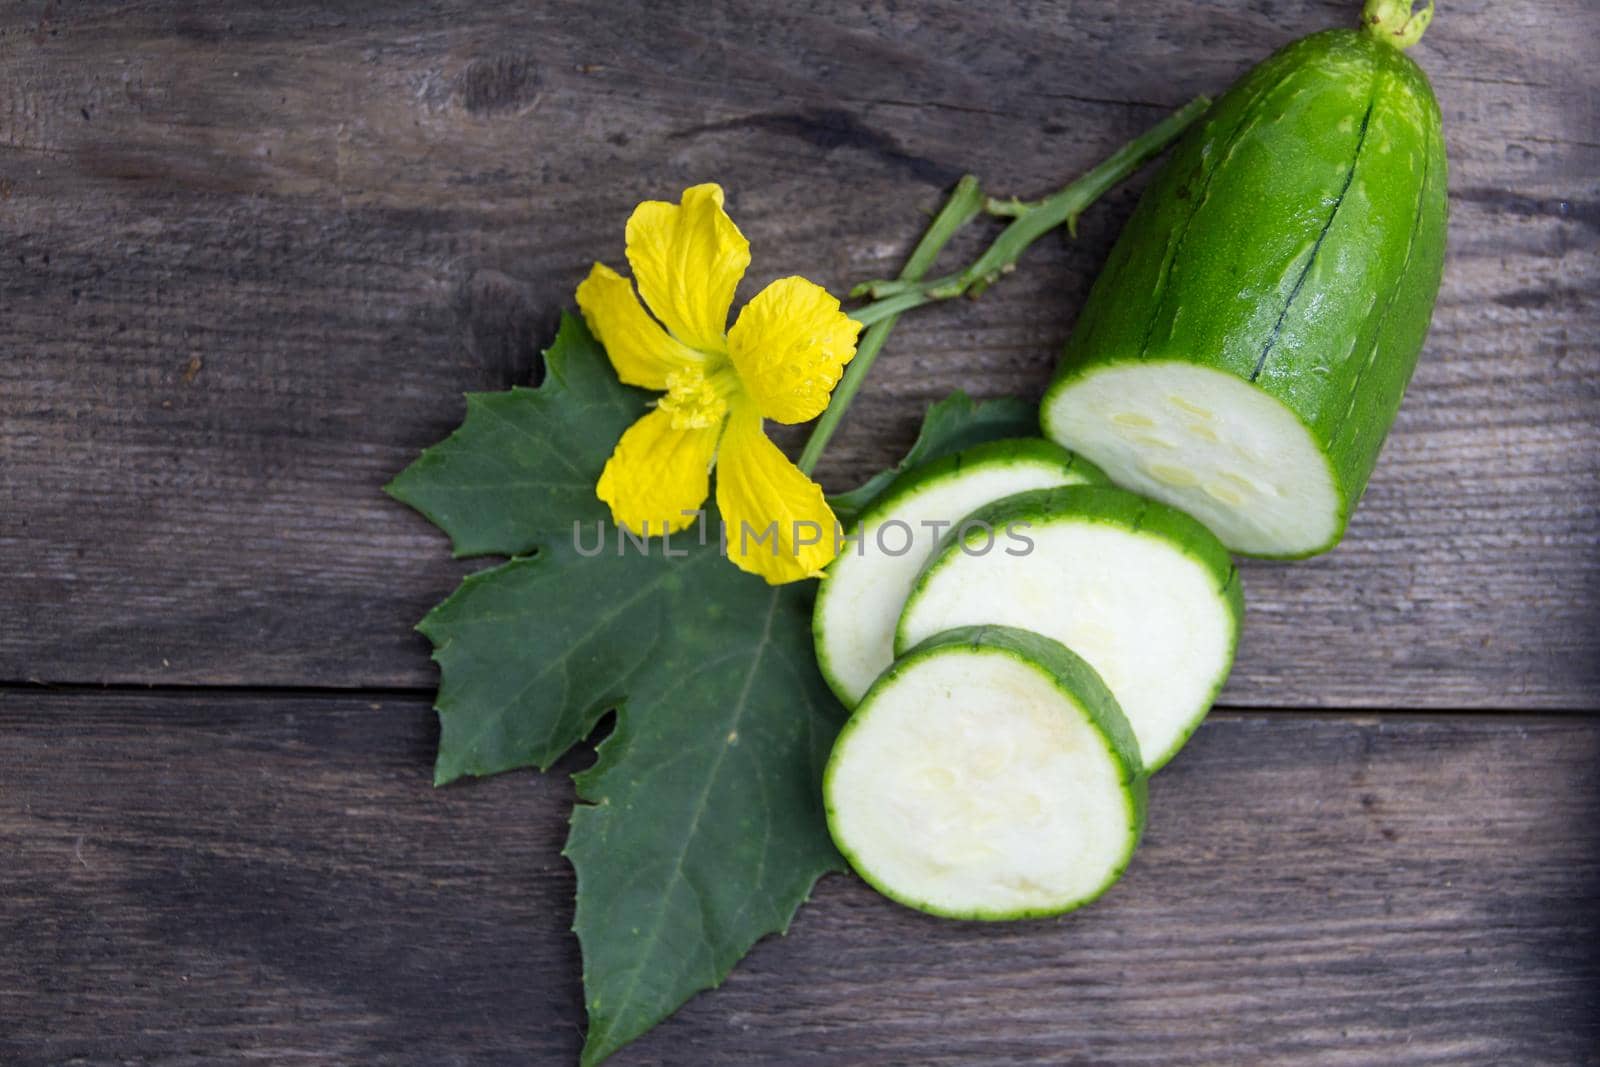 fruit and flower of the green luffa that is used for Asian cuisine, on rustic wooden background by GabrielaBertolini